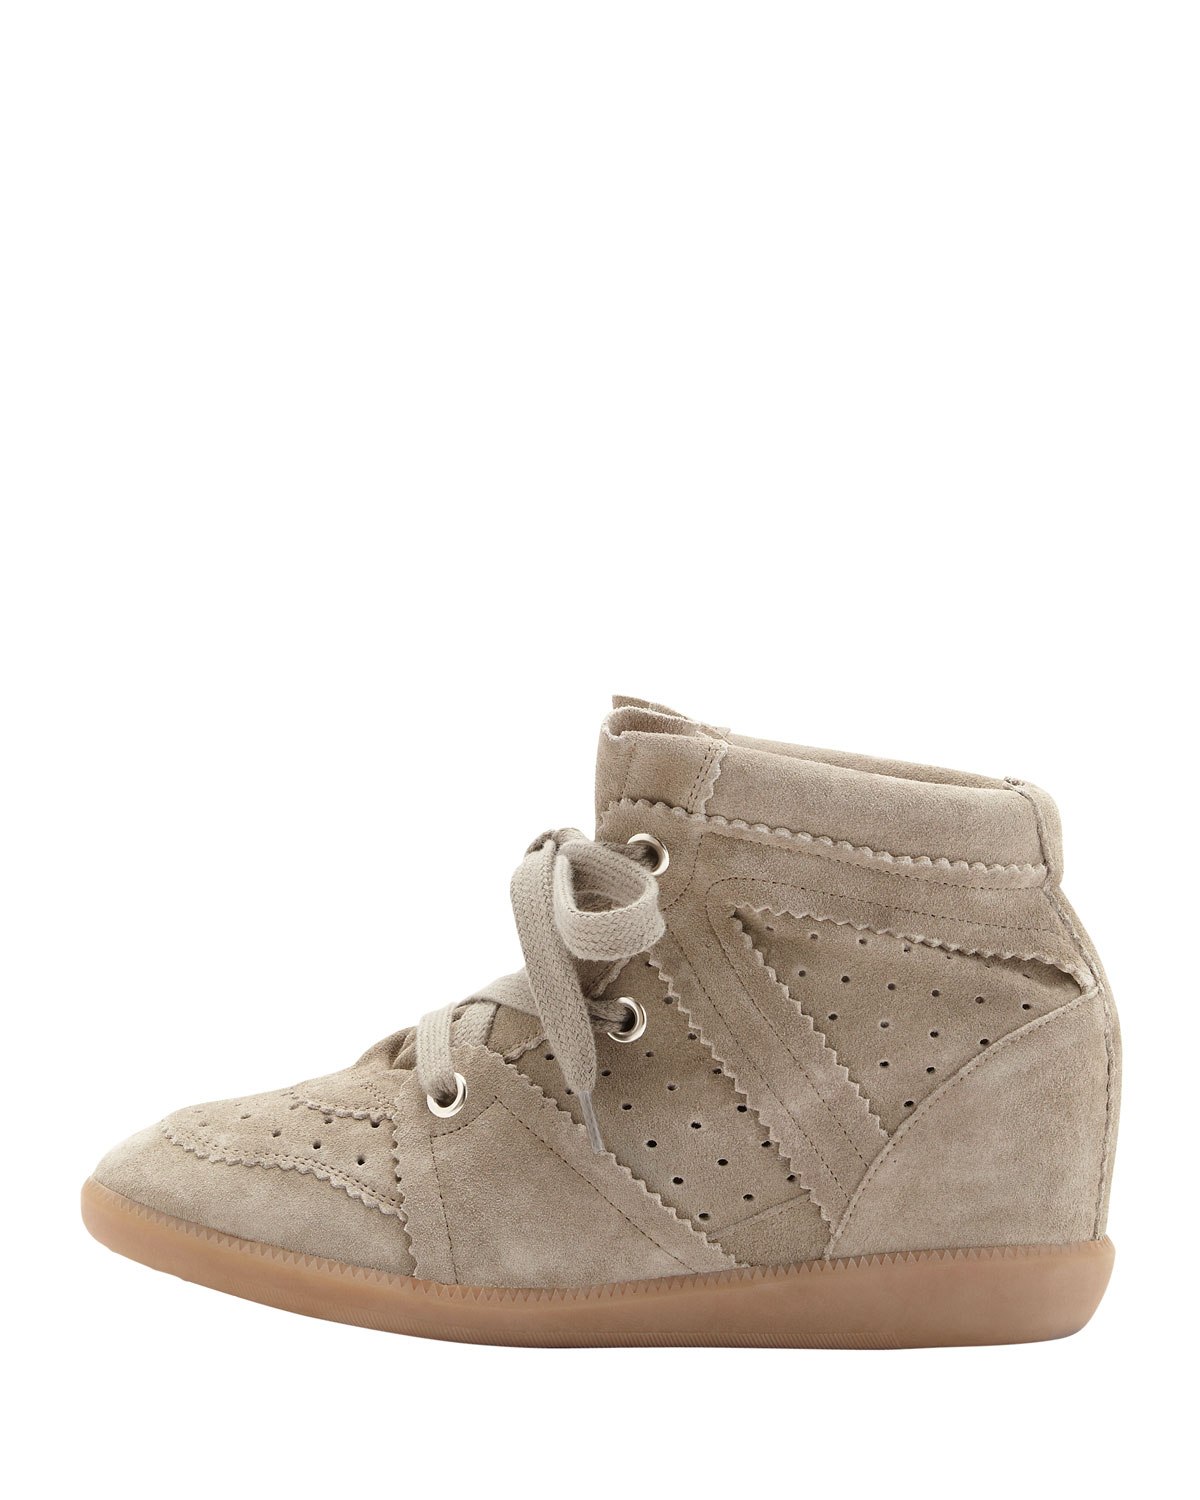 Lyst - Isabel Marant Bobby Lowrise Perforated Wedge Sneaker Taupe in Gray